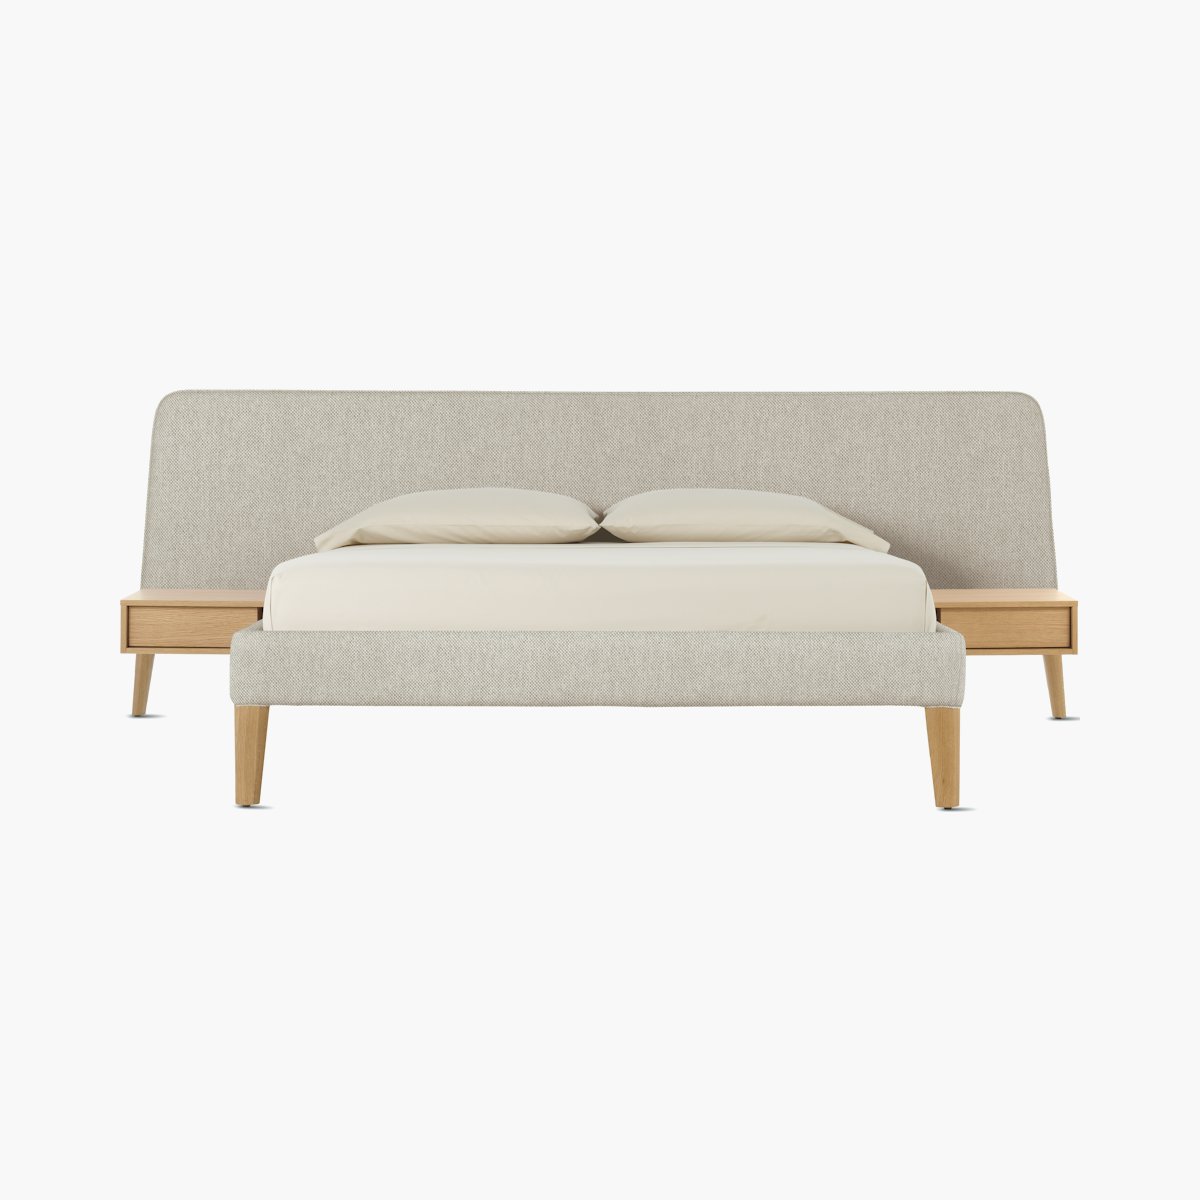 Parallel Bed, Wide